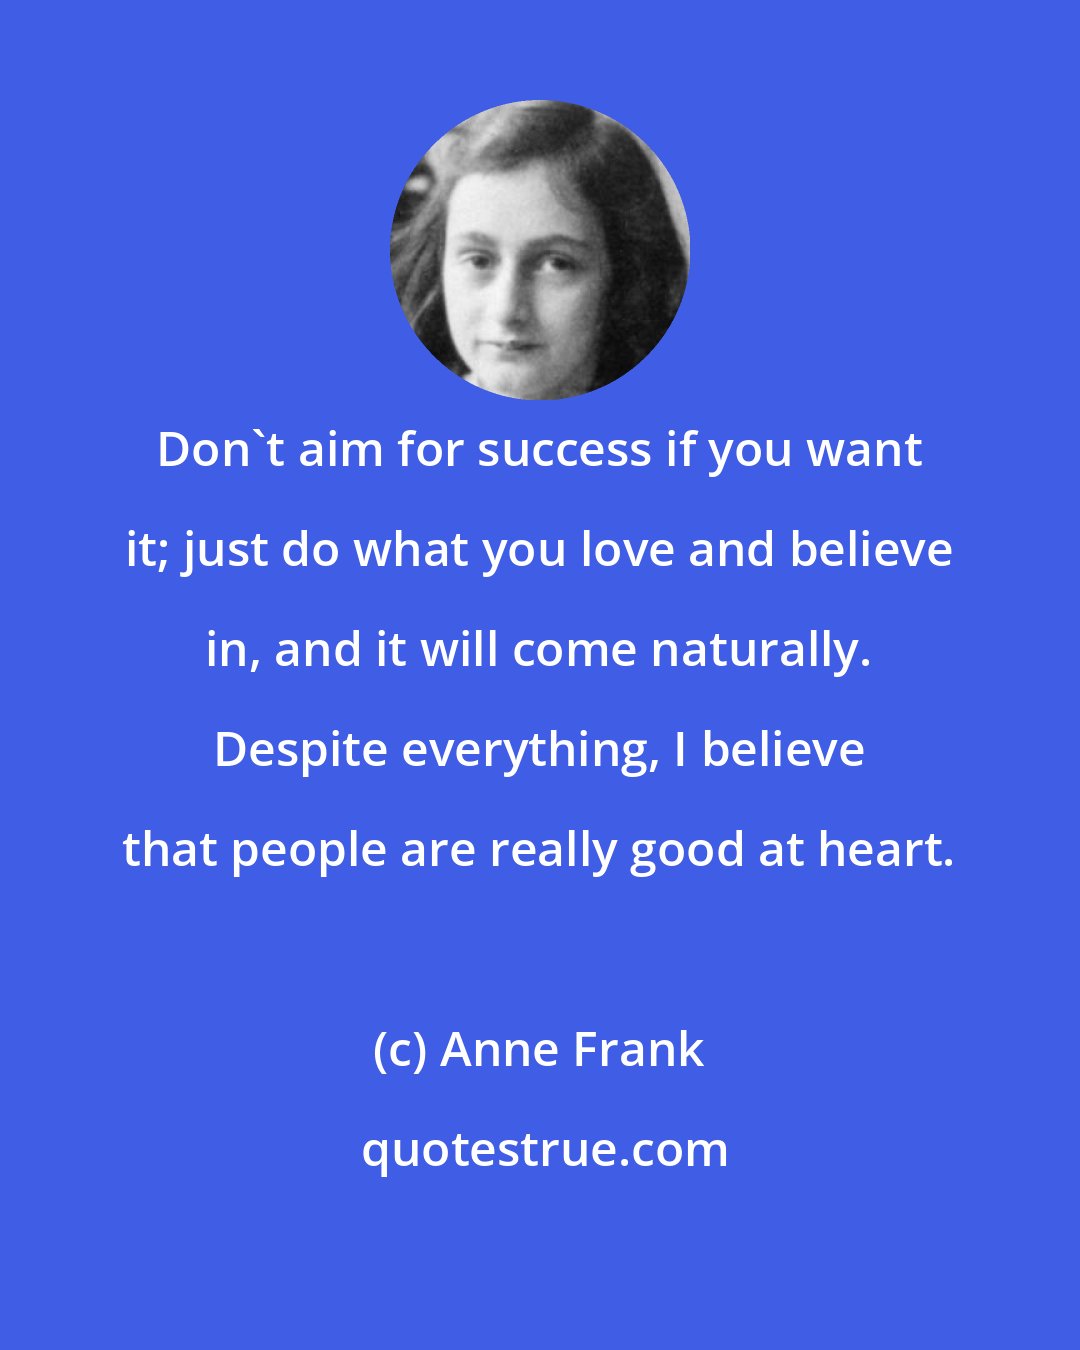 Anne Frank: Don't aim for success if you want it; just do what you love and believe in, and it will come naturally. Despite everything, I believe that people are really good at heart.